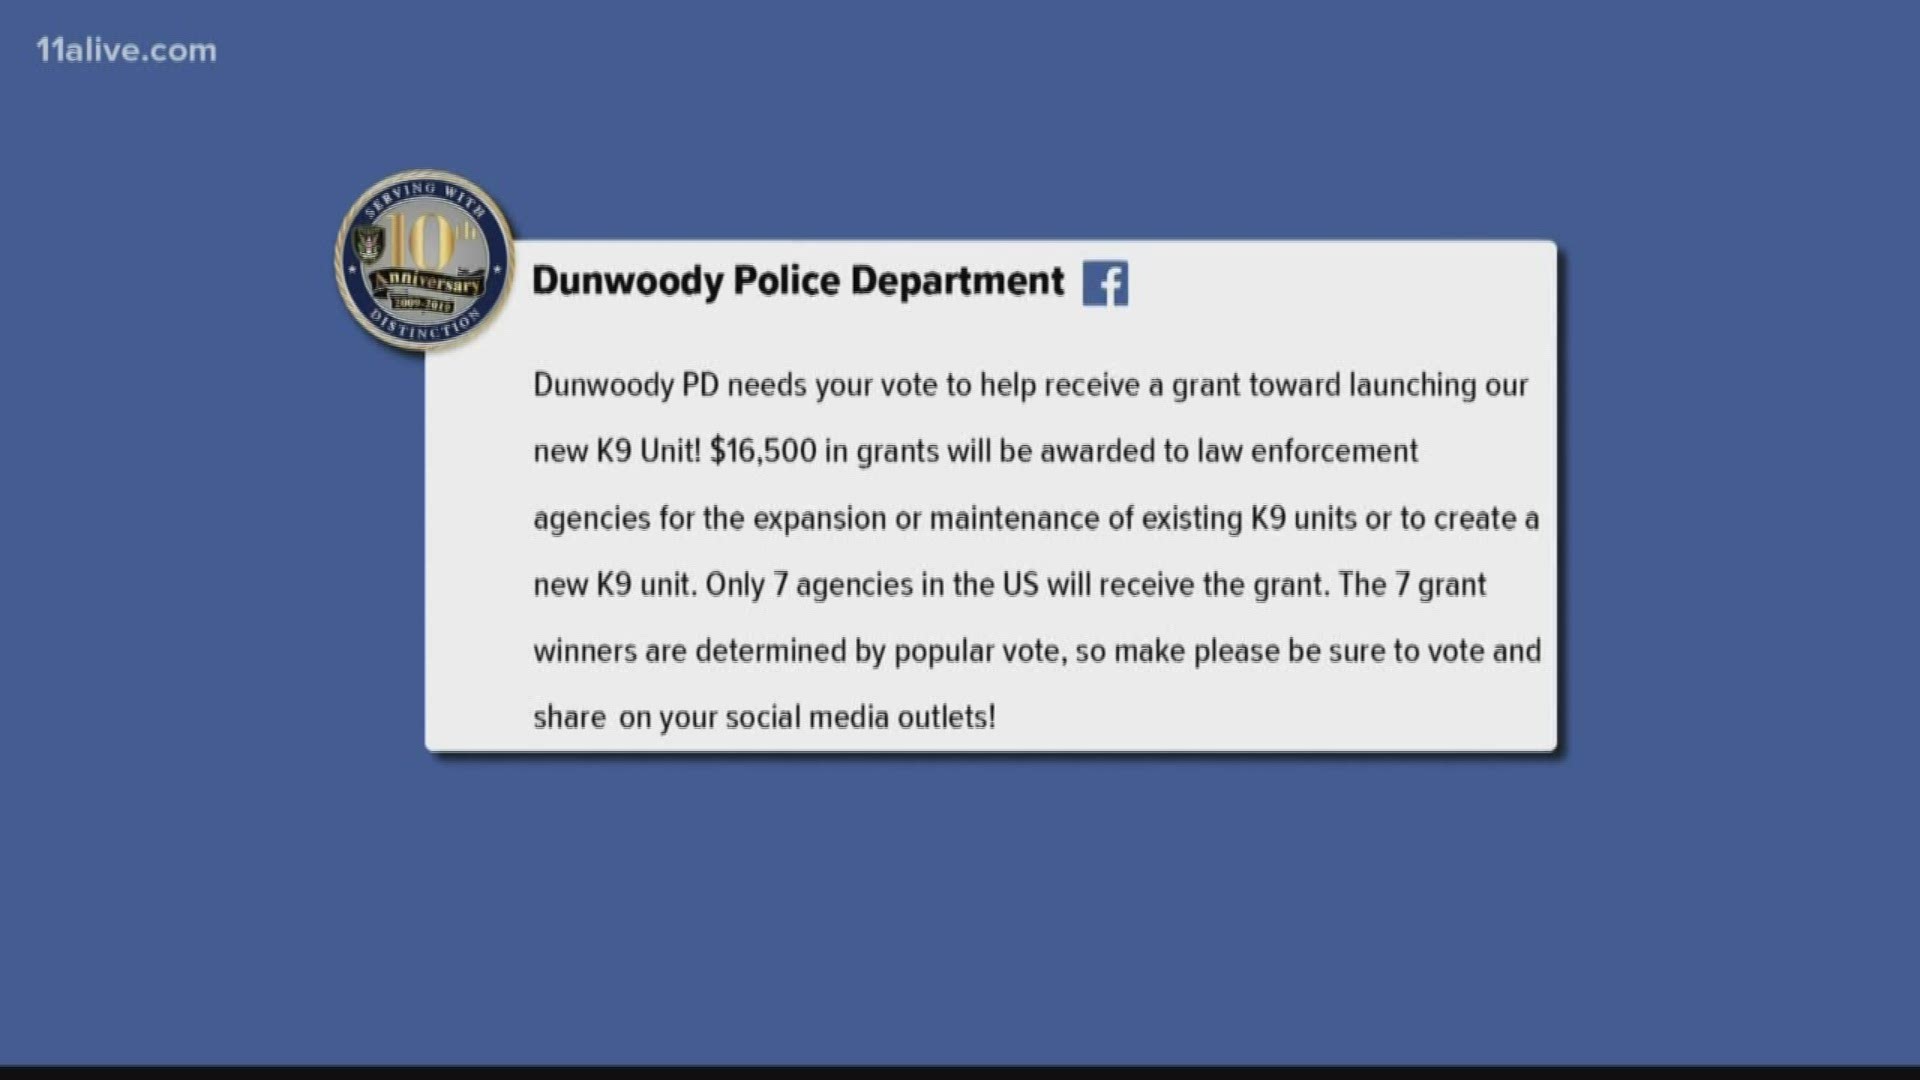 A spokesperson for Dunwoody Police said that 50 agencies have applied to win the grant.